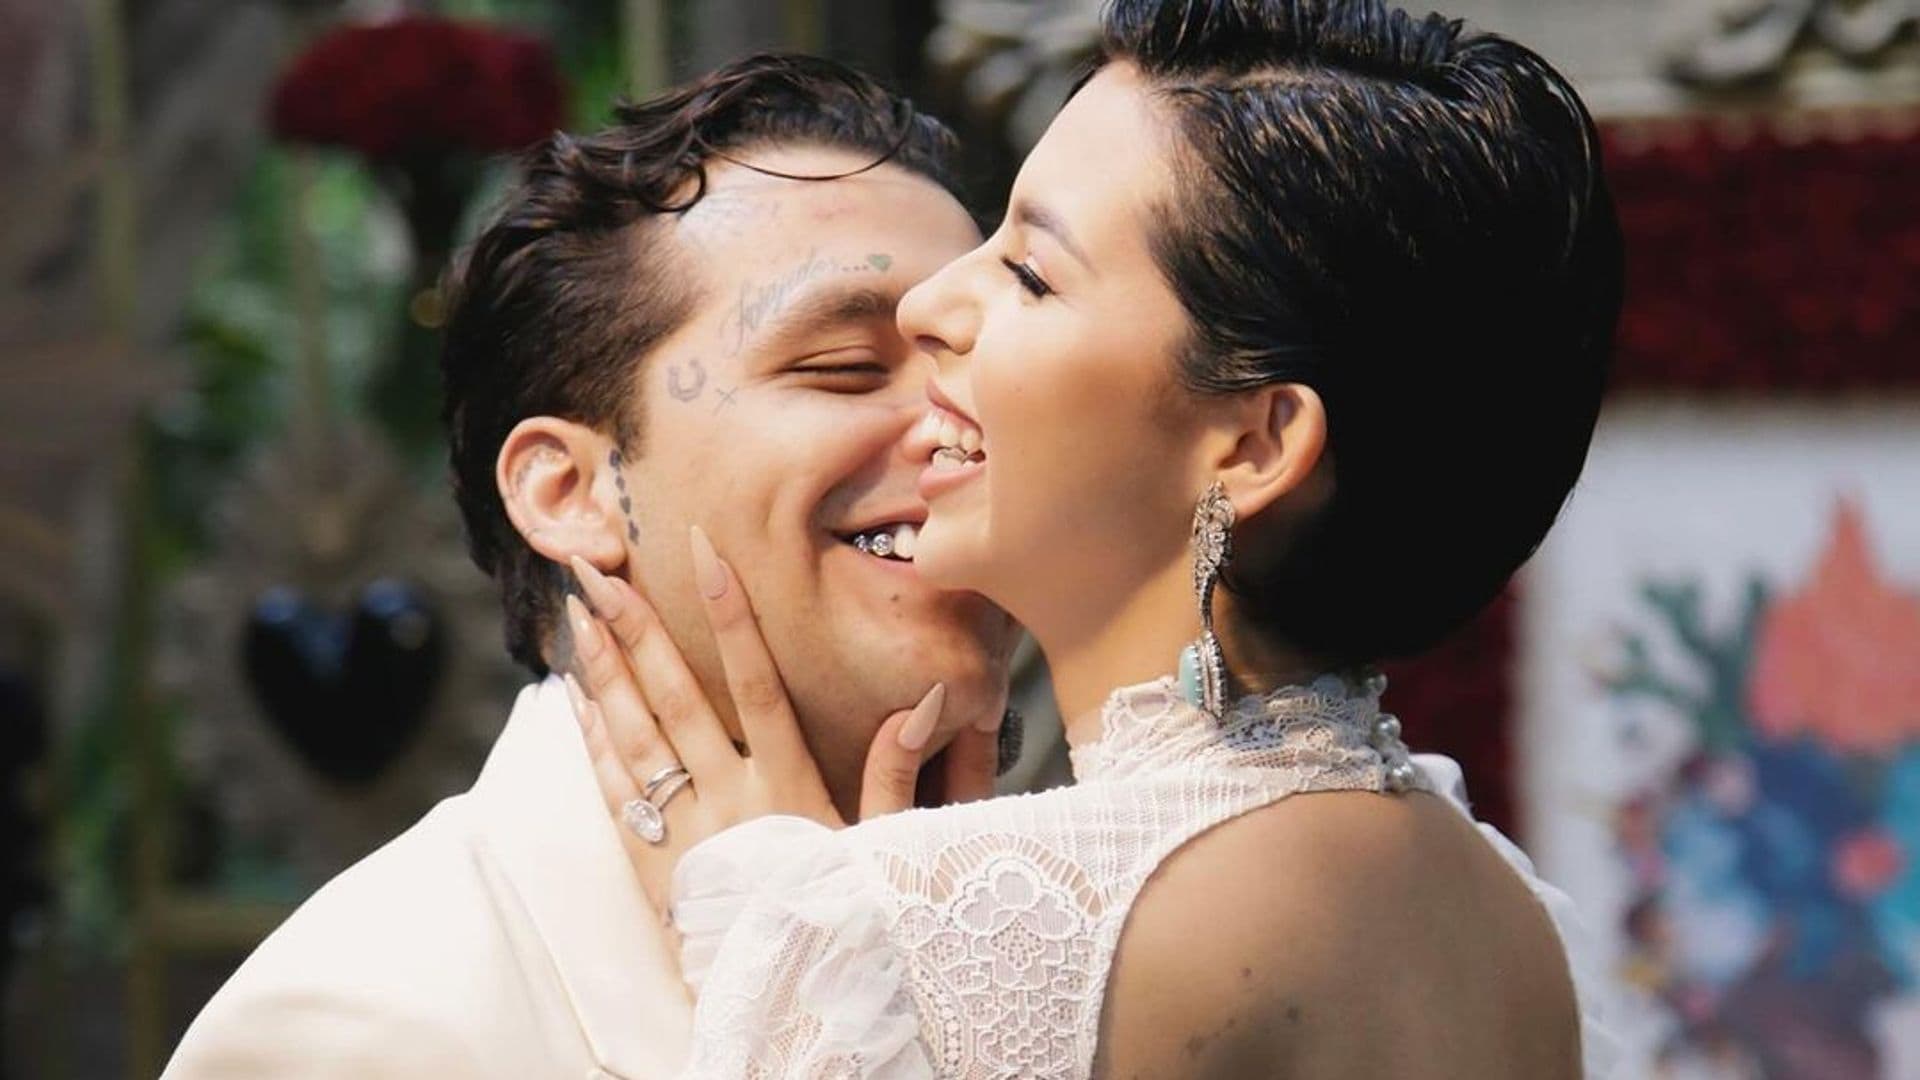 Christian Nodal introduces Angela Aguilar as his "wife" at a show in Mazatlan